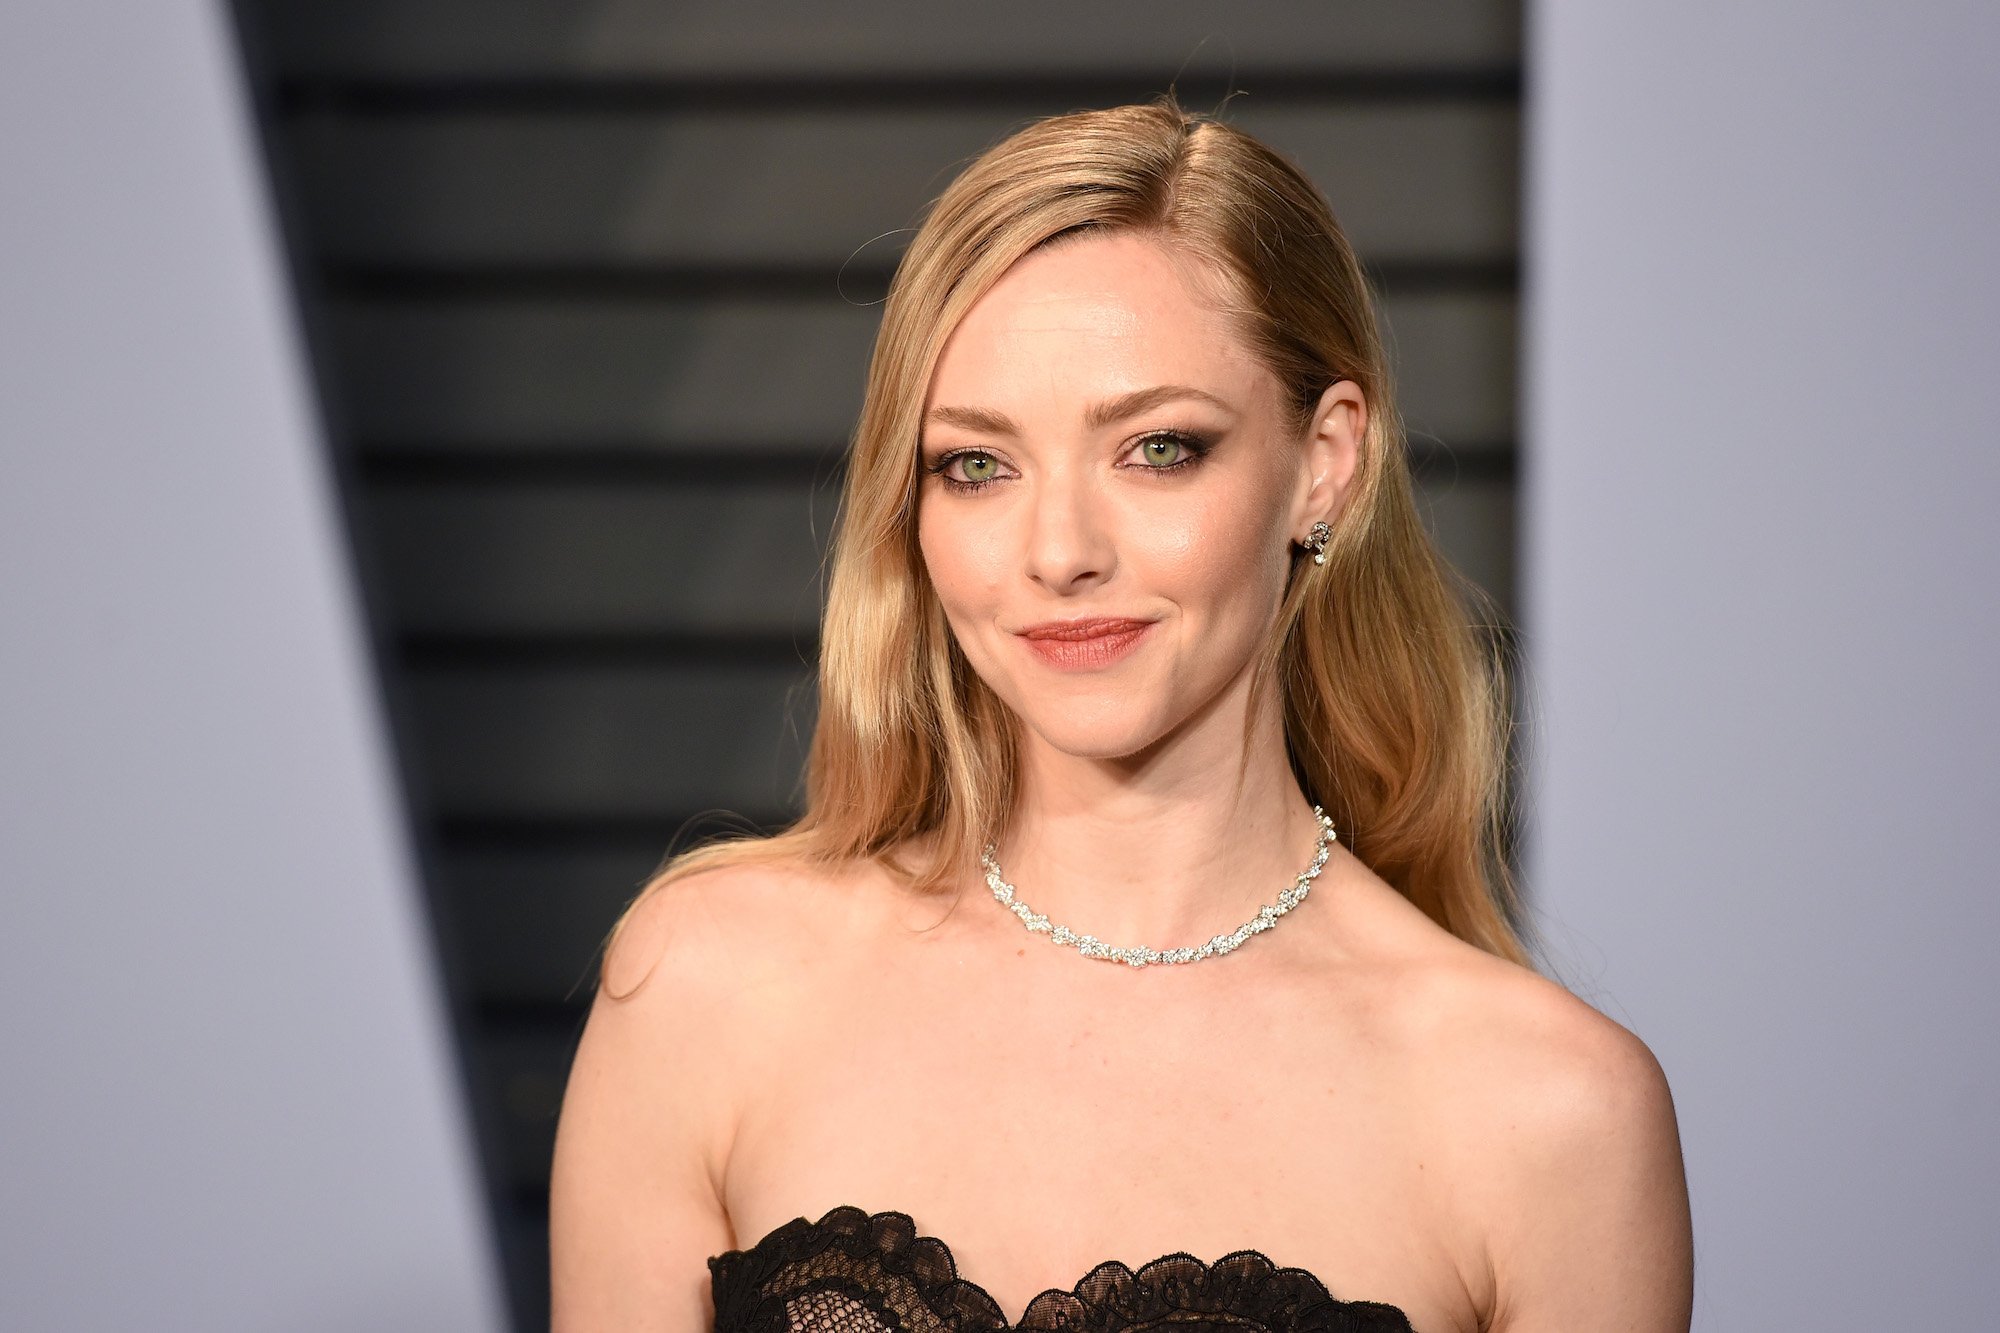 Amanda Seyfried’s Foot Tattoo Has a Rather Racy Meaning